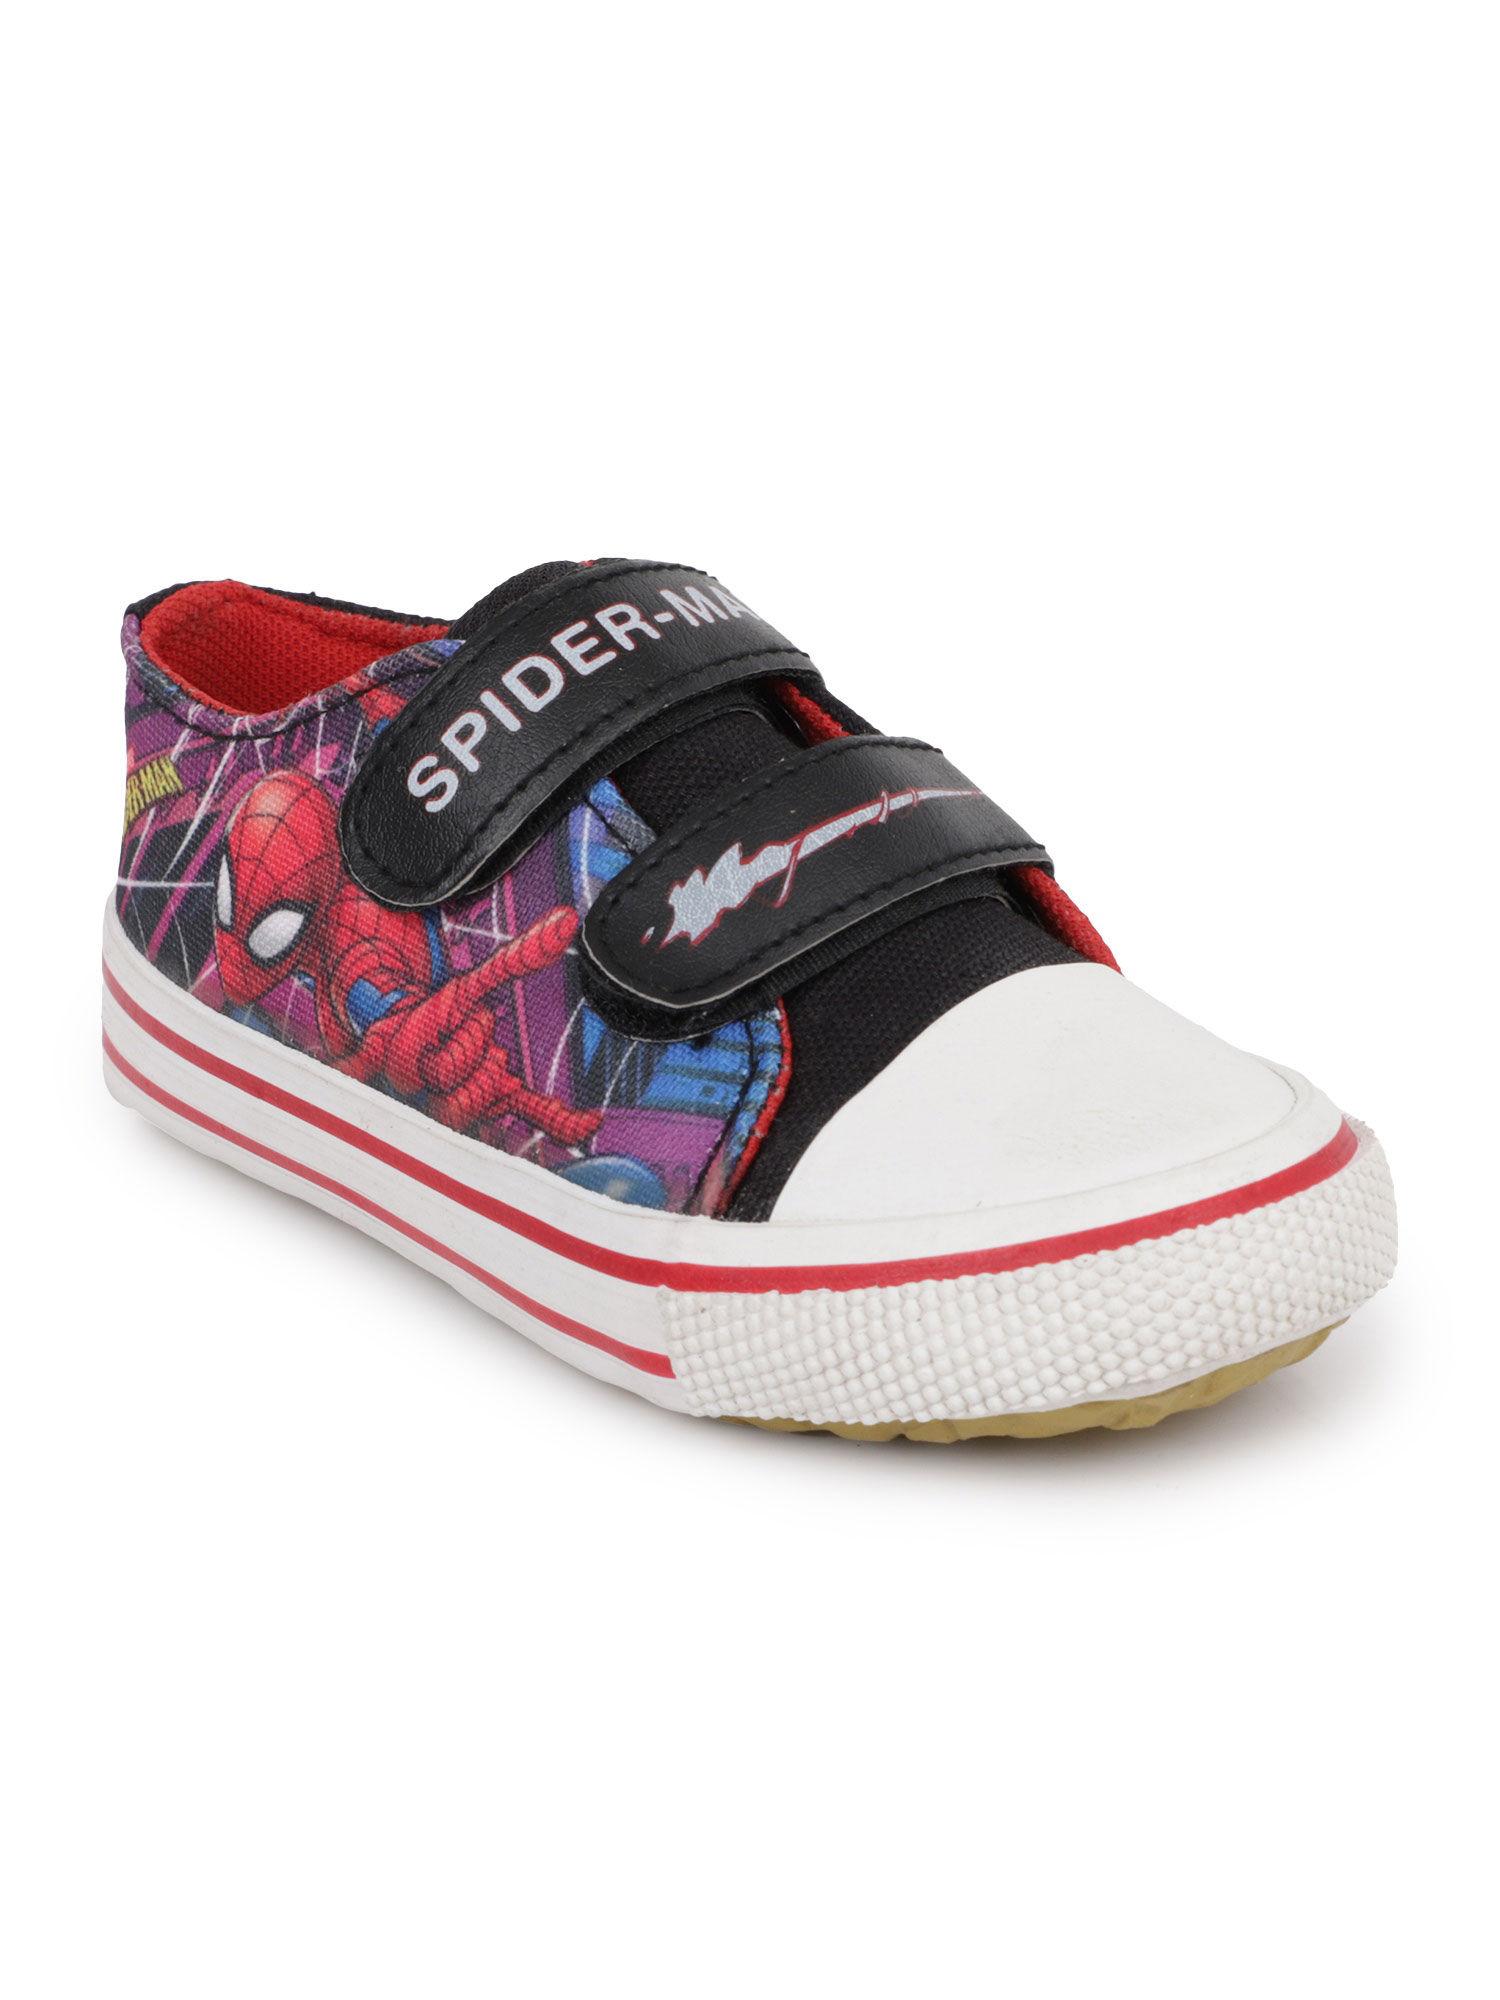 black color spiderman printed canvas shoes for boys